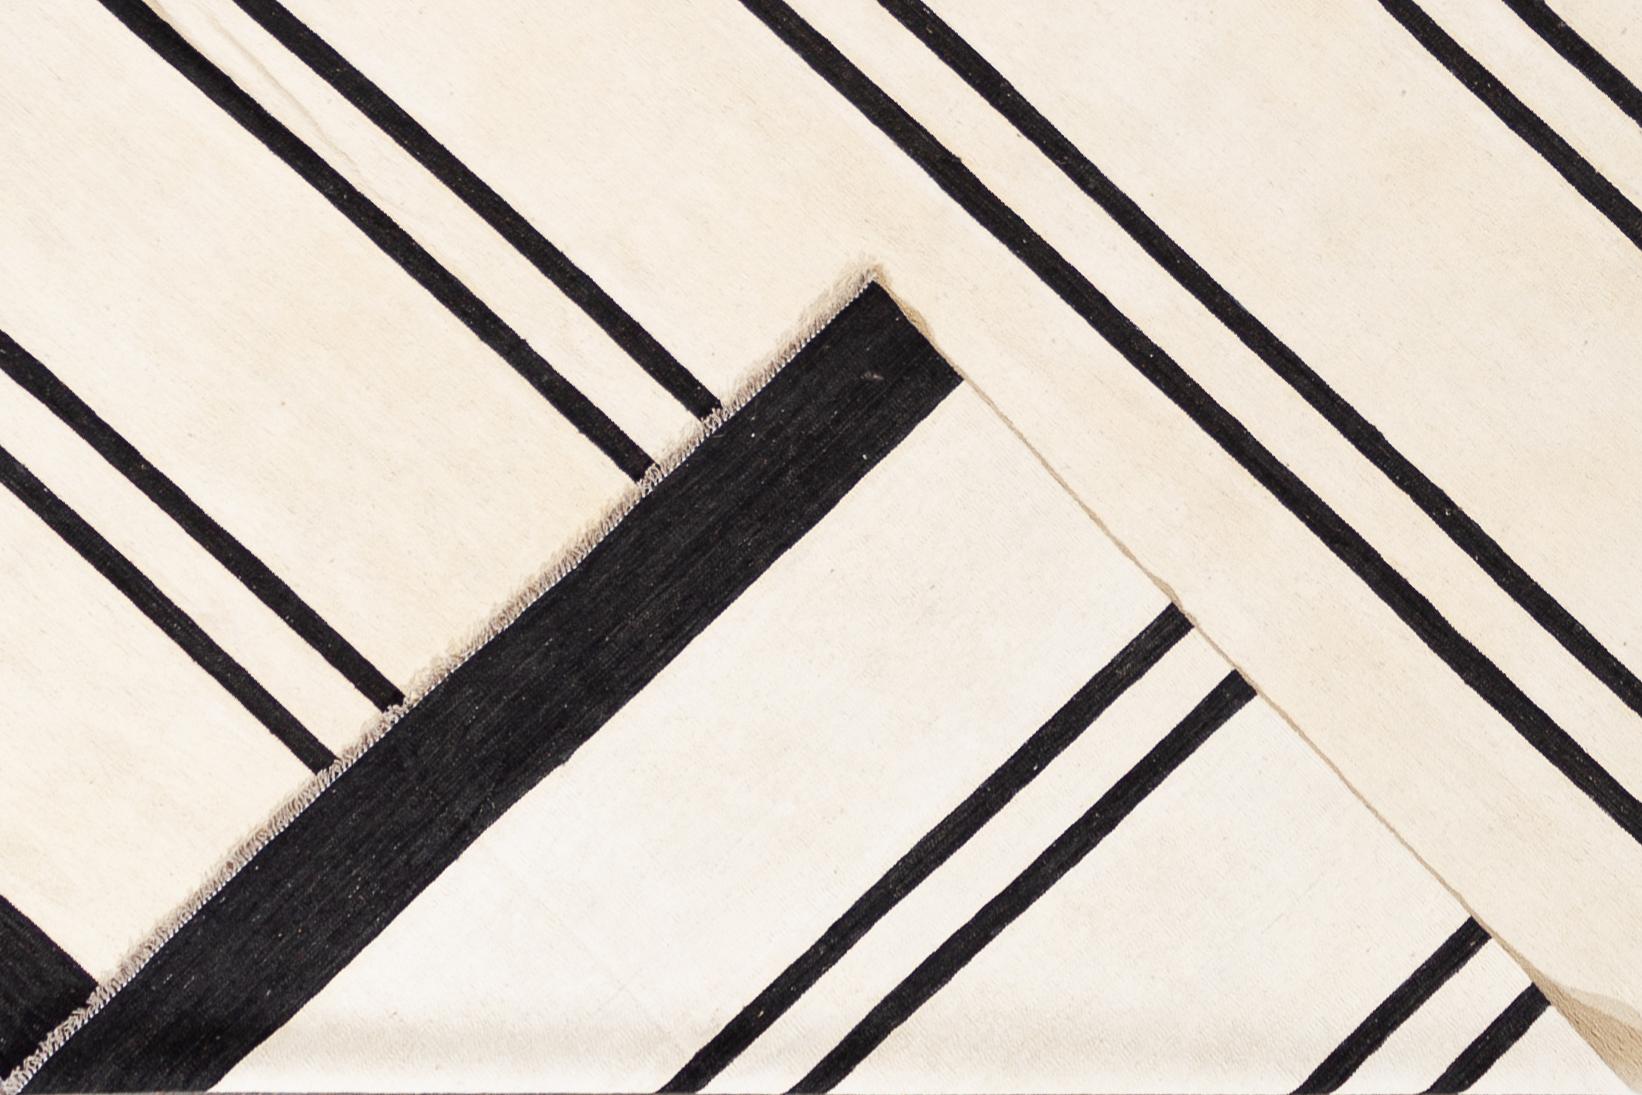 Beautiful 21st century contemporary Kilim rug, handwoven wool in an all-over black and white striped design.

This rug measures 12' 0